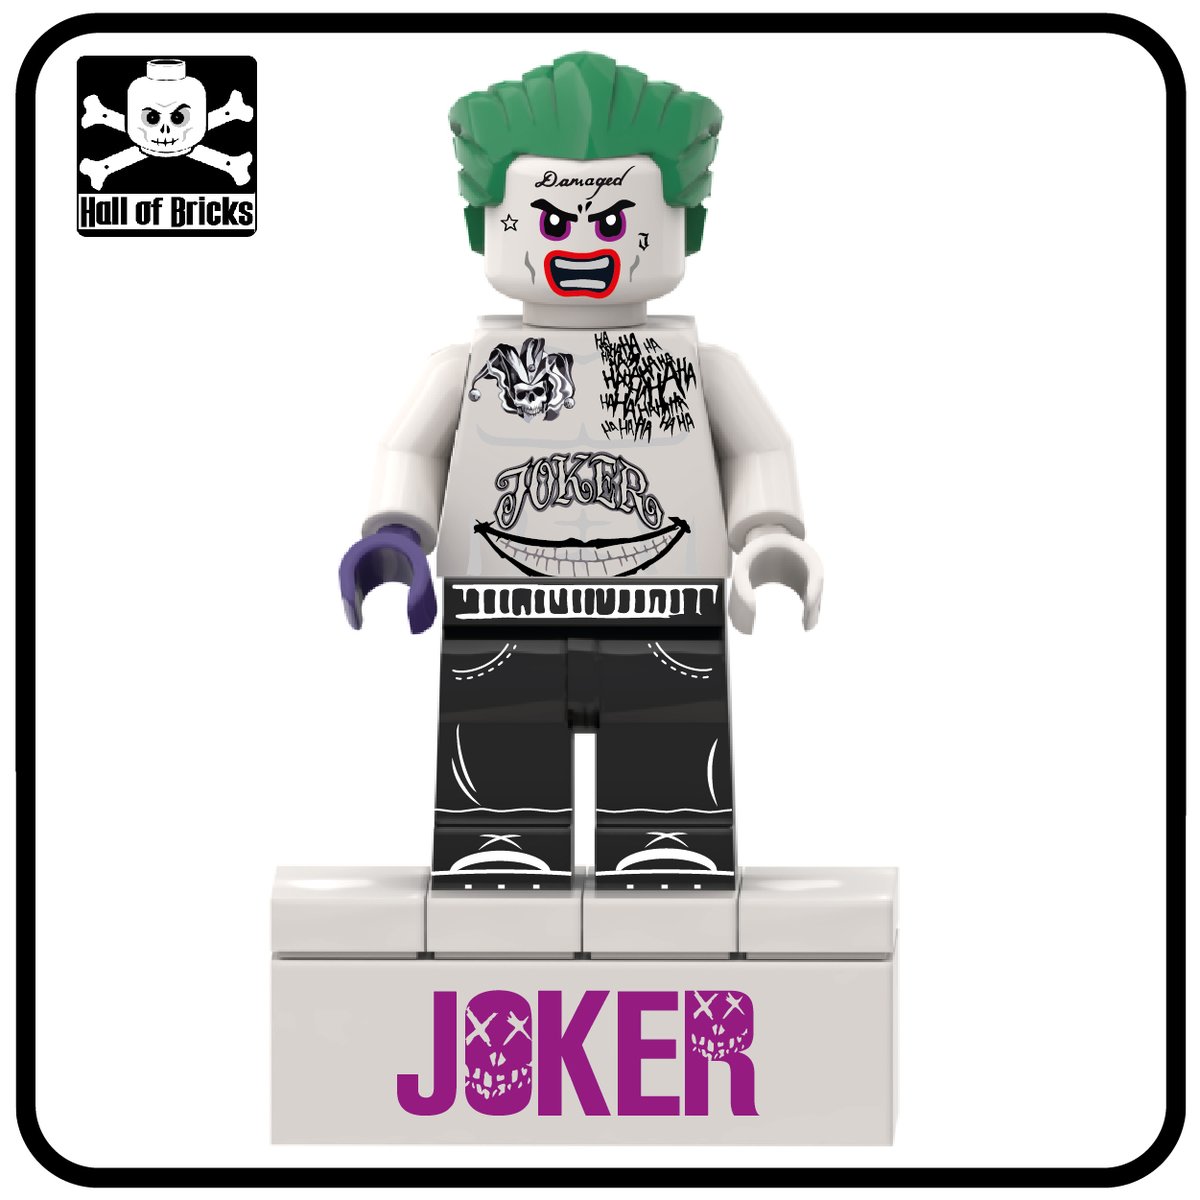 Hall Bricks on Twitter: "check out our latest release the LEGO® Custom printed Minifig Suicide Squad Joker. first minifig where we placed print under the arms and on the hand.